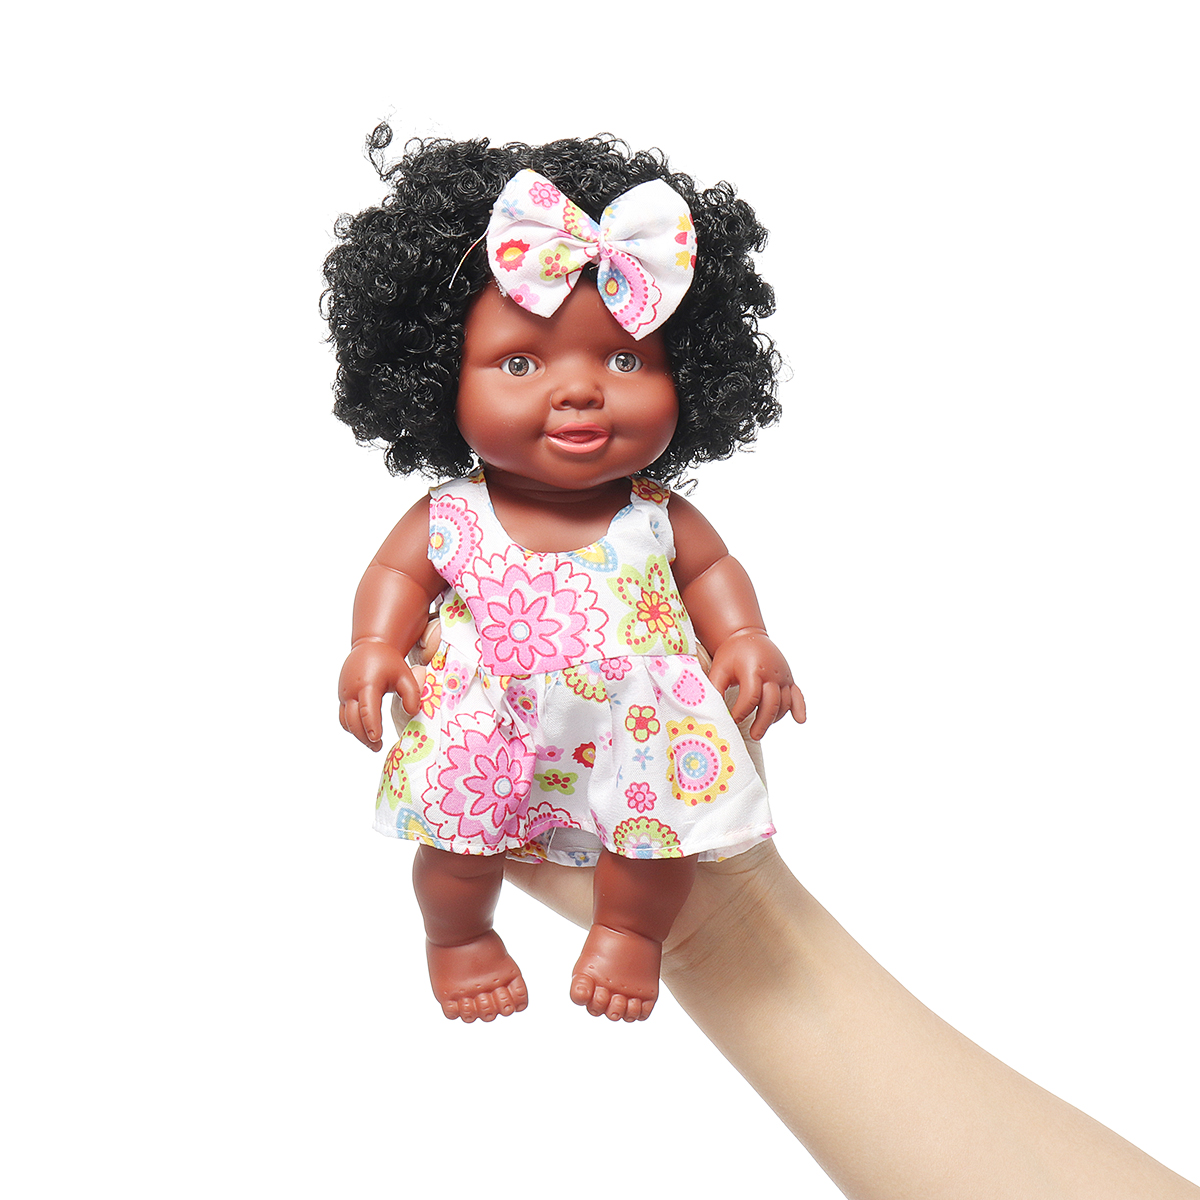 25CM-Cute-Soft-Silicone-Joint-Movable-Lifelike-Realistic-African-Black-Reborn-Baby-Doll-for-Kids-Gif-1733542-6